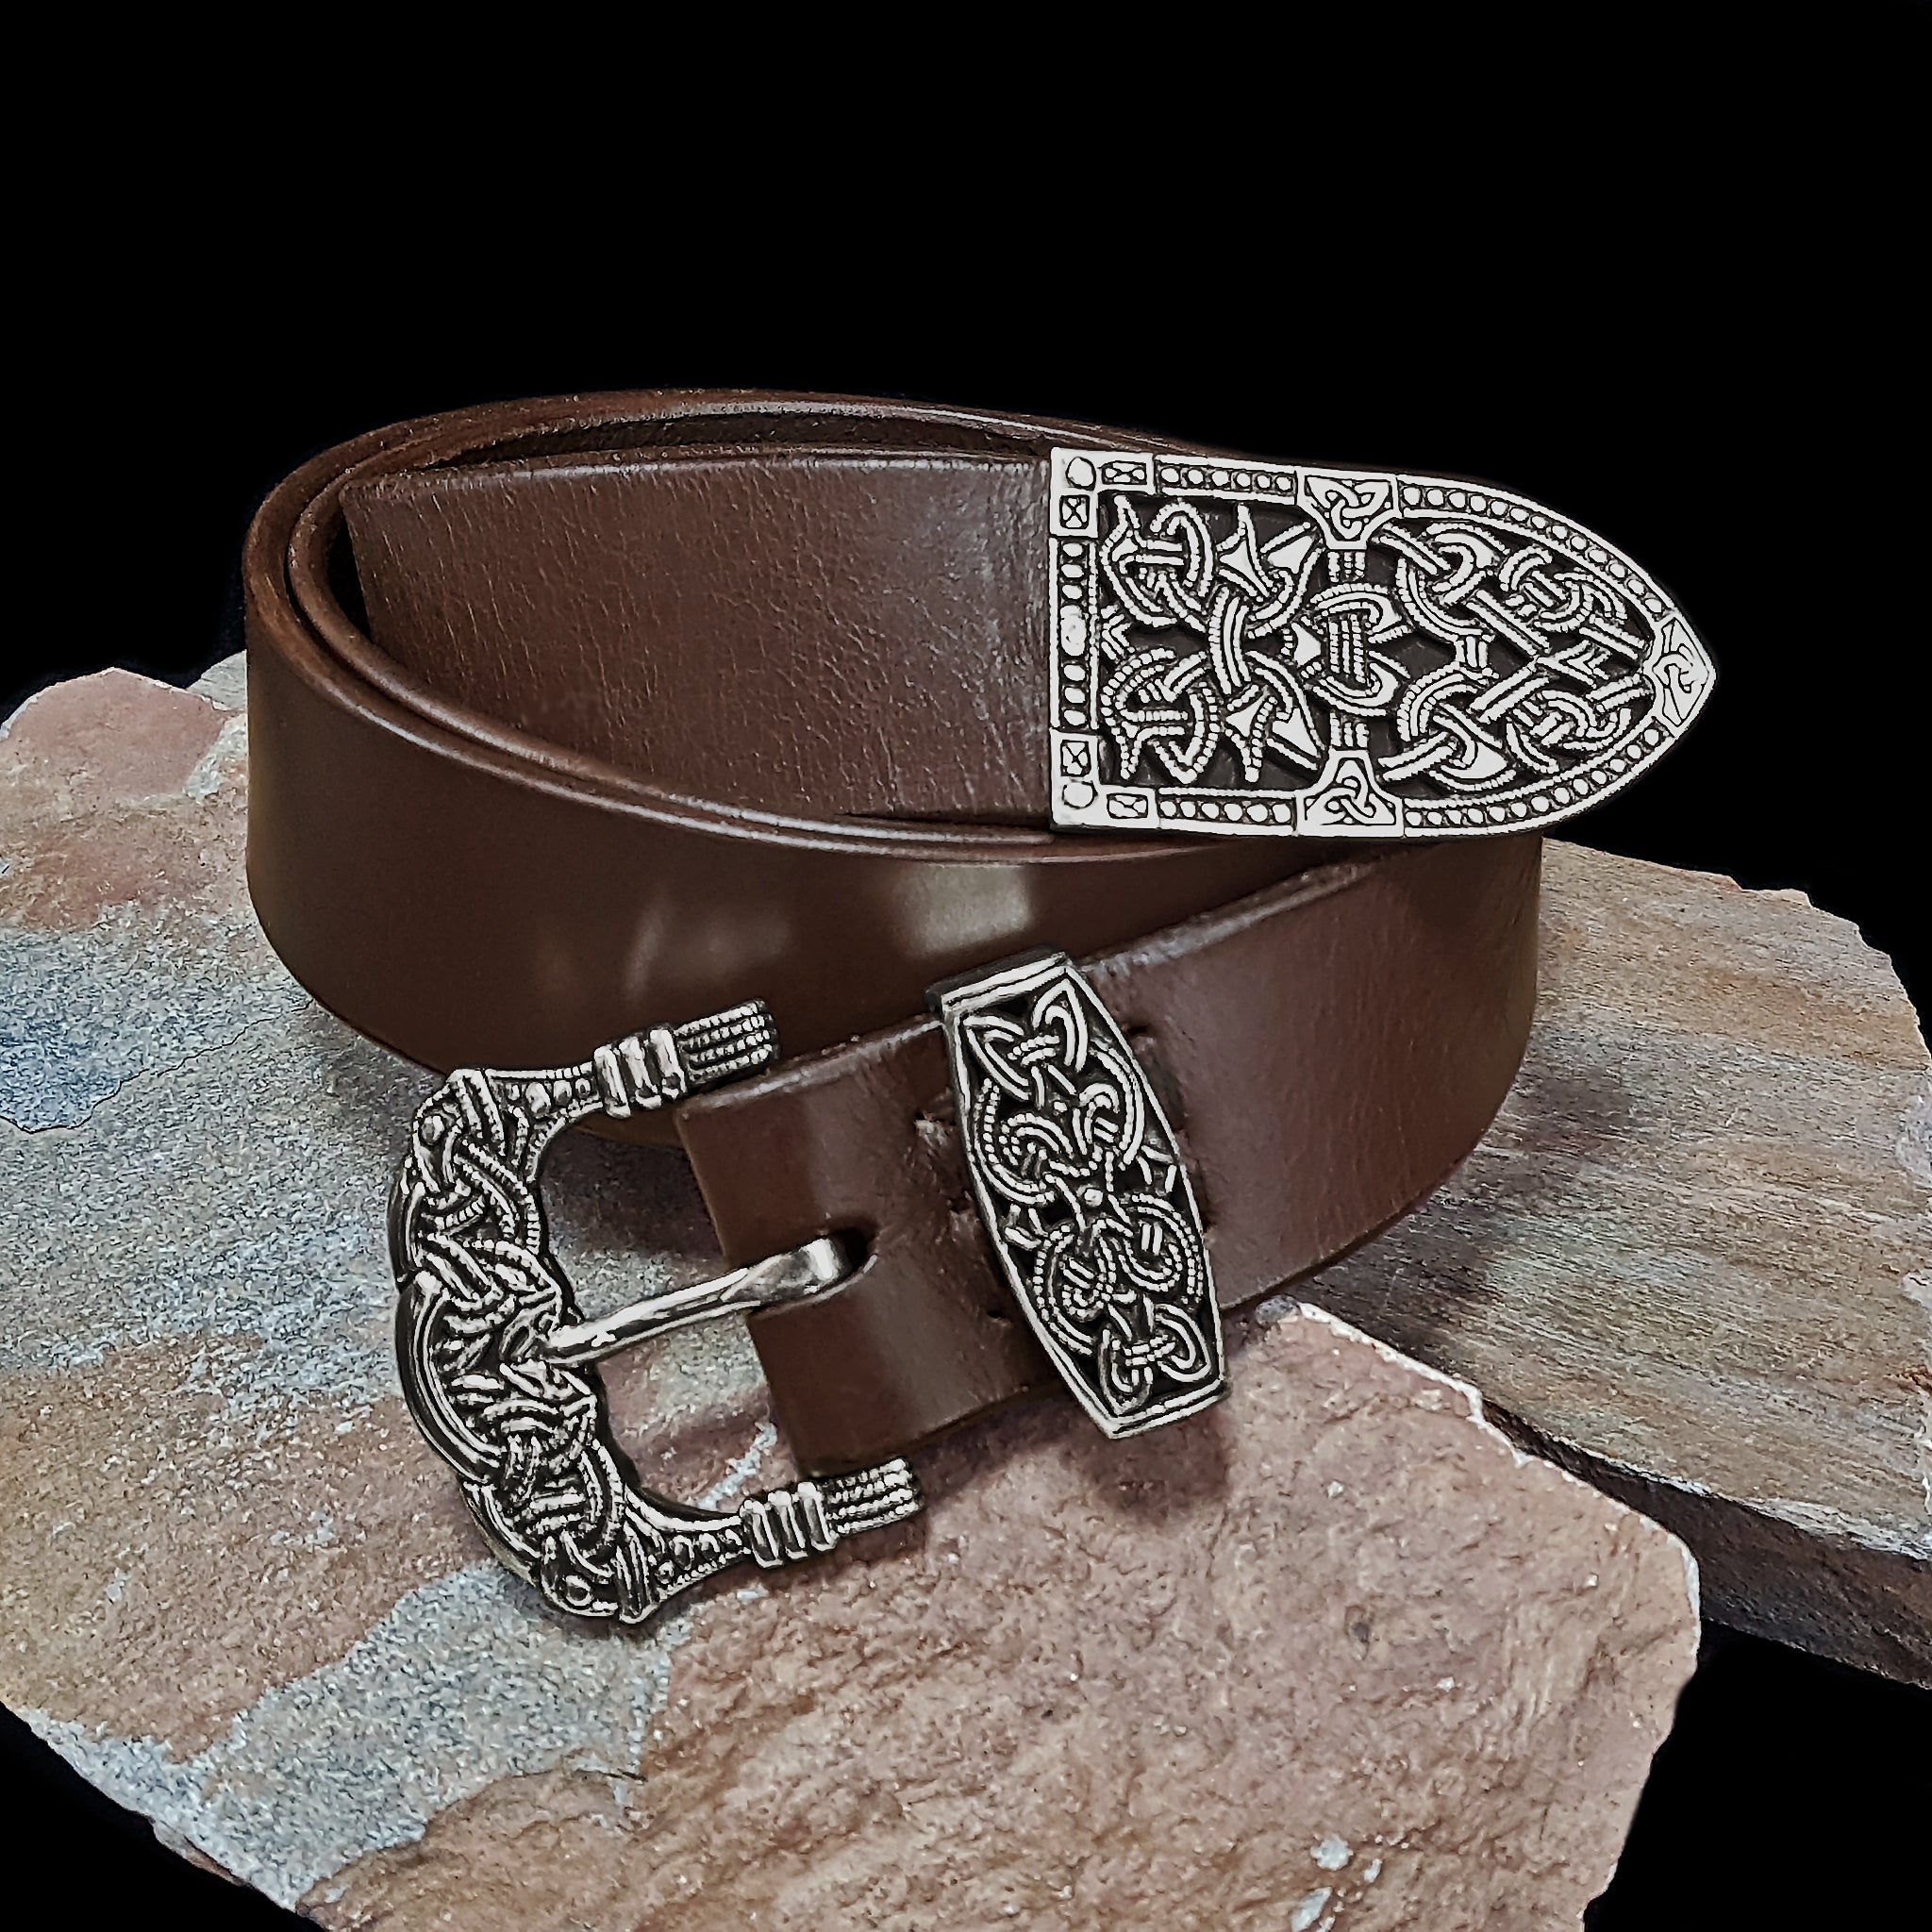 High Status Viking Belt With Silver Gokstad Fittings - Brown Leather Strap